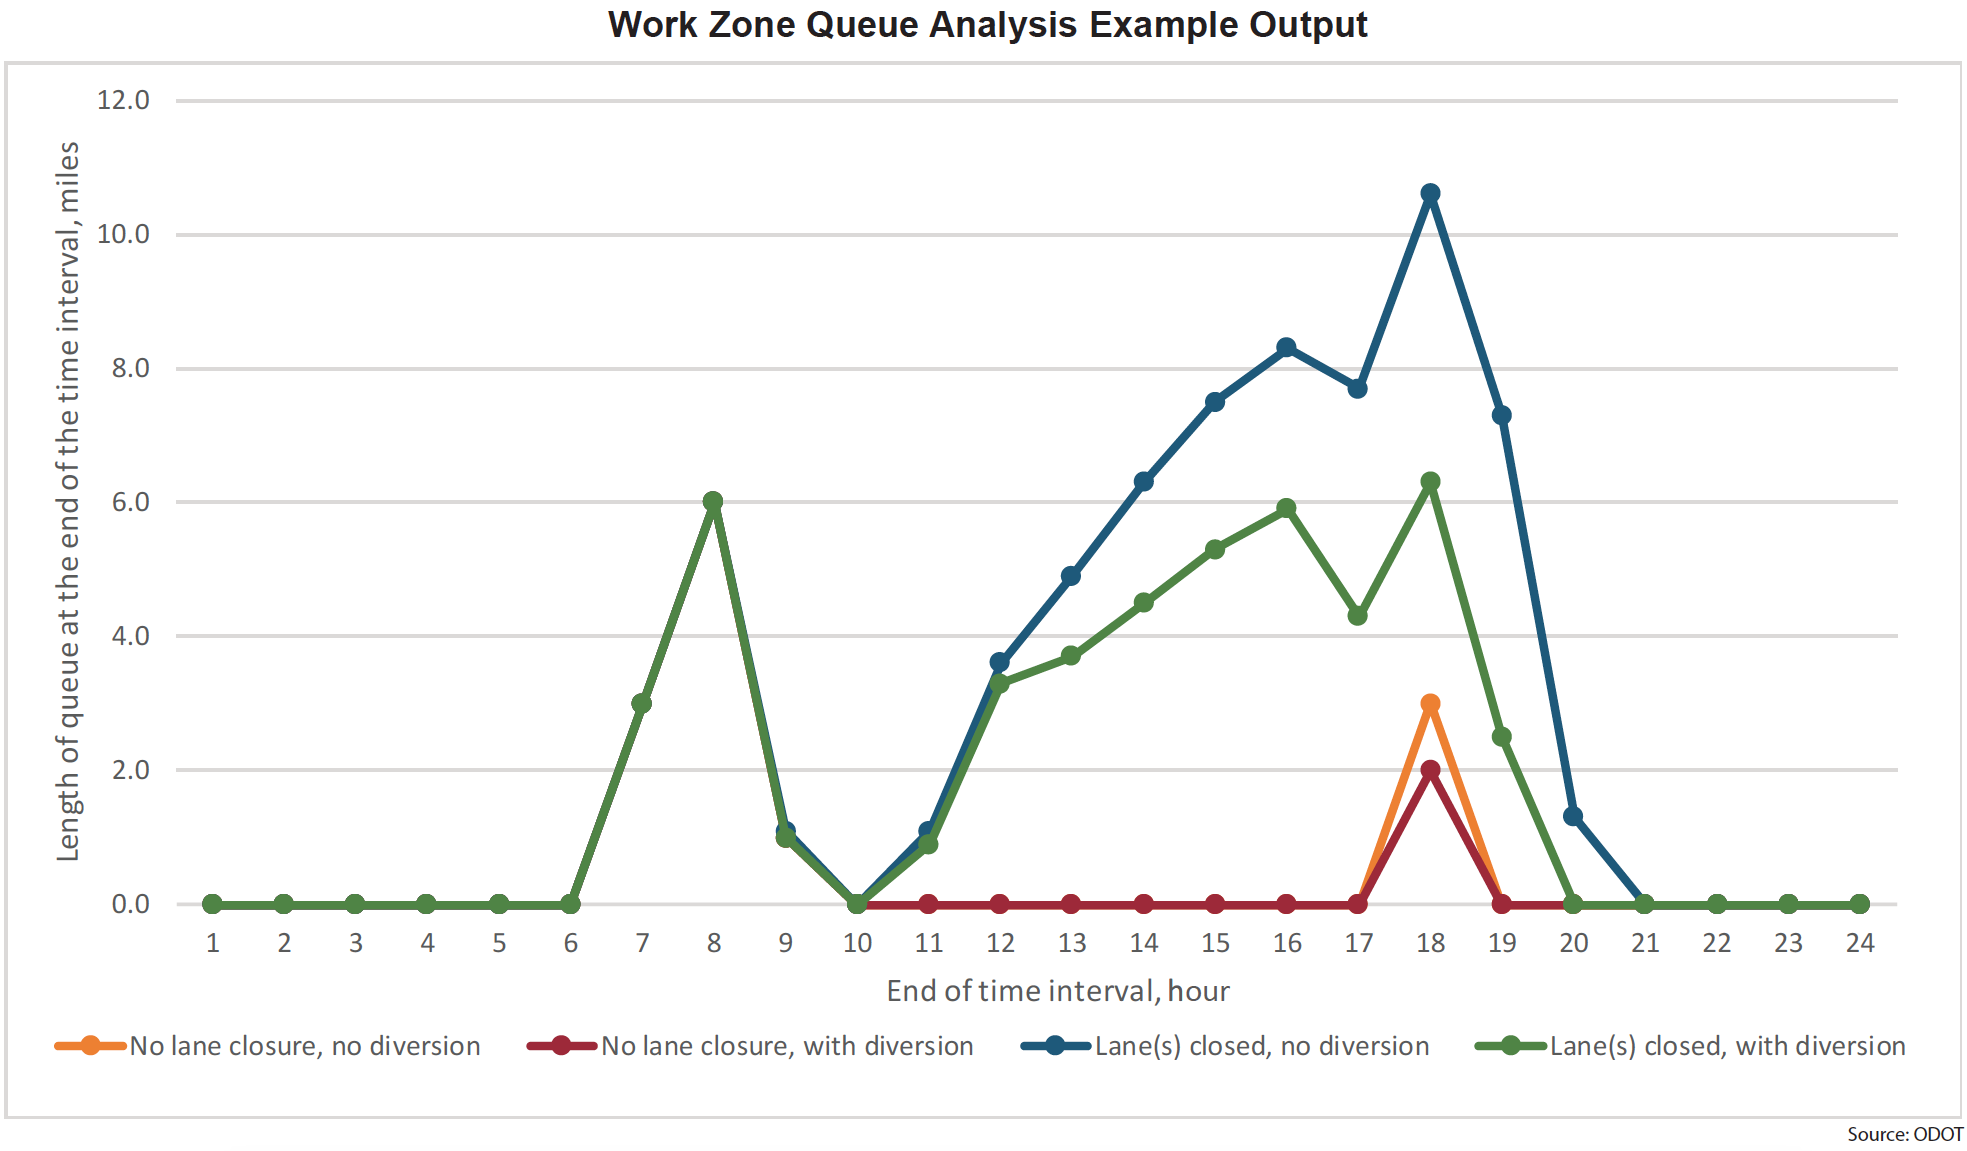 Chart showing an example of work zone queue analysis output, indicating length of queue by hour.  Chart tracts: no lane closure, no diversion; no lane closure, with diversion; lane(s) closed, no diversion; lane(s) closed, with diversion.